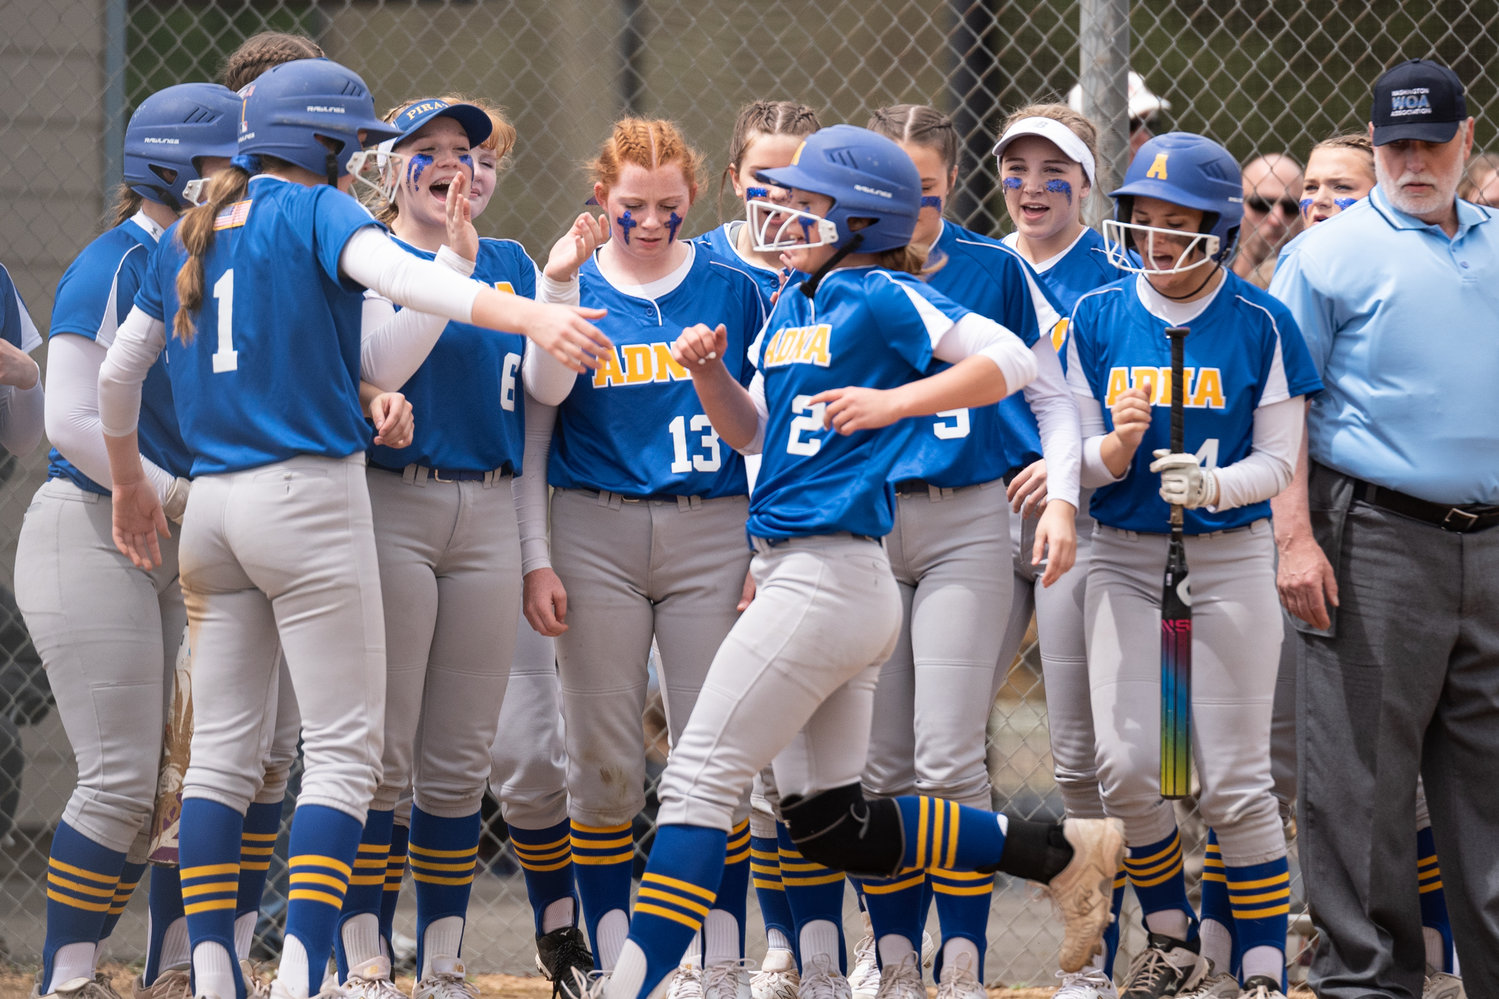 Adna pitcher Ava Simms is greeted at home plate by her teammates after a home run against Toutle Lake in the 2B District 4 tournament at Fort Borst Park May 20.